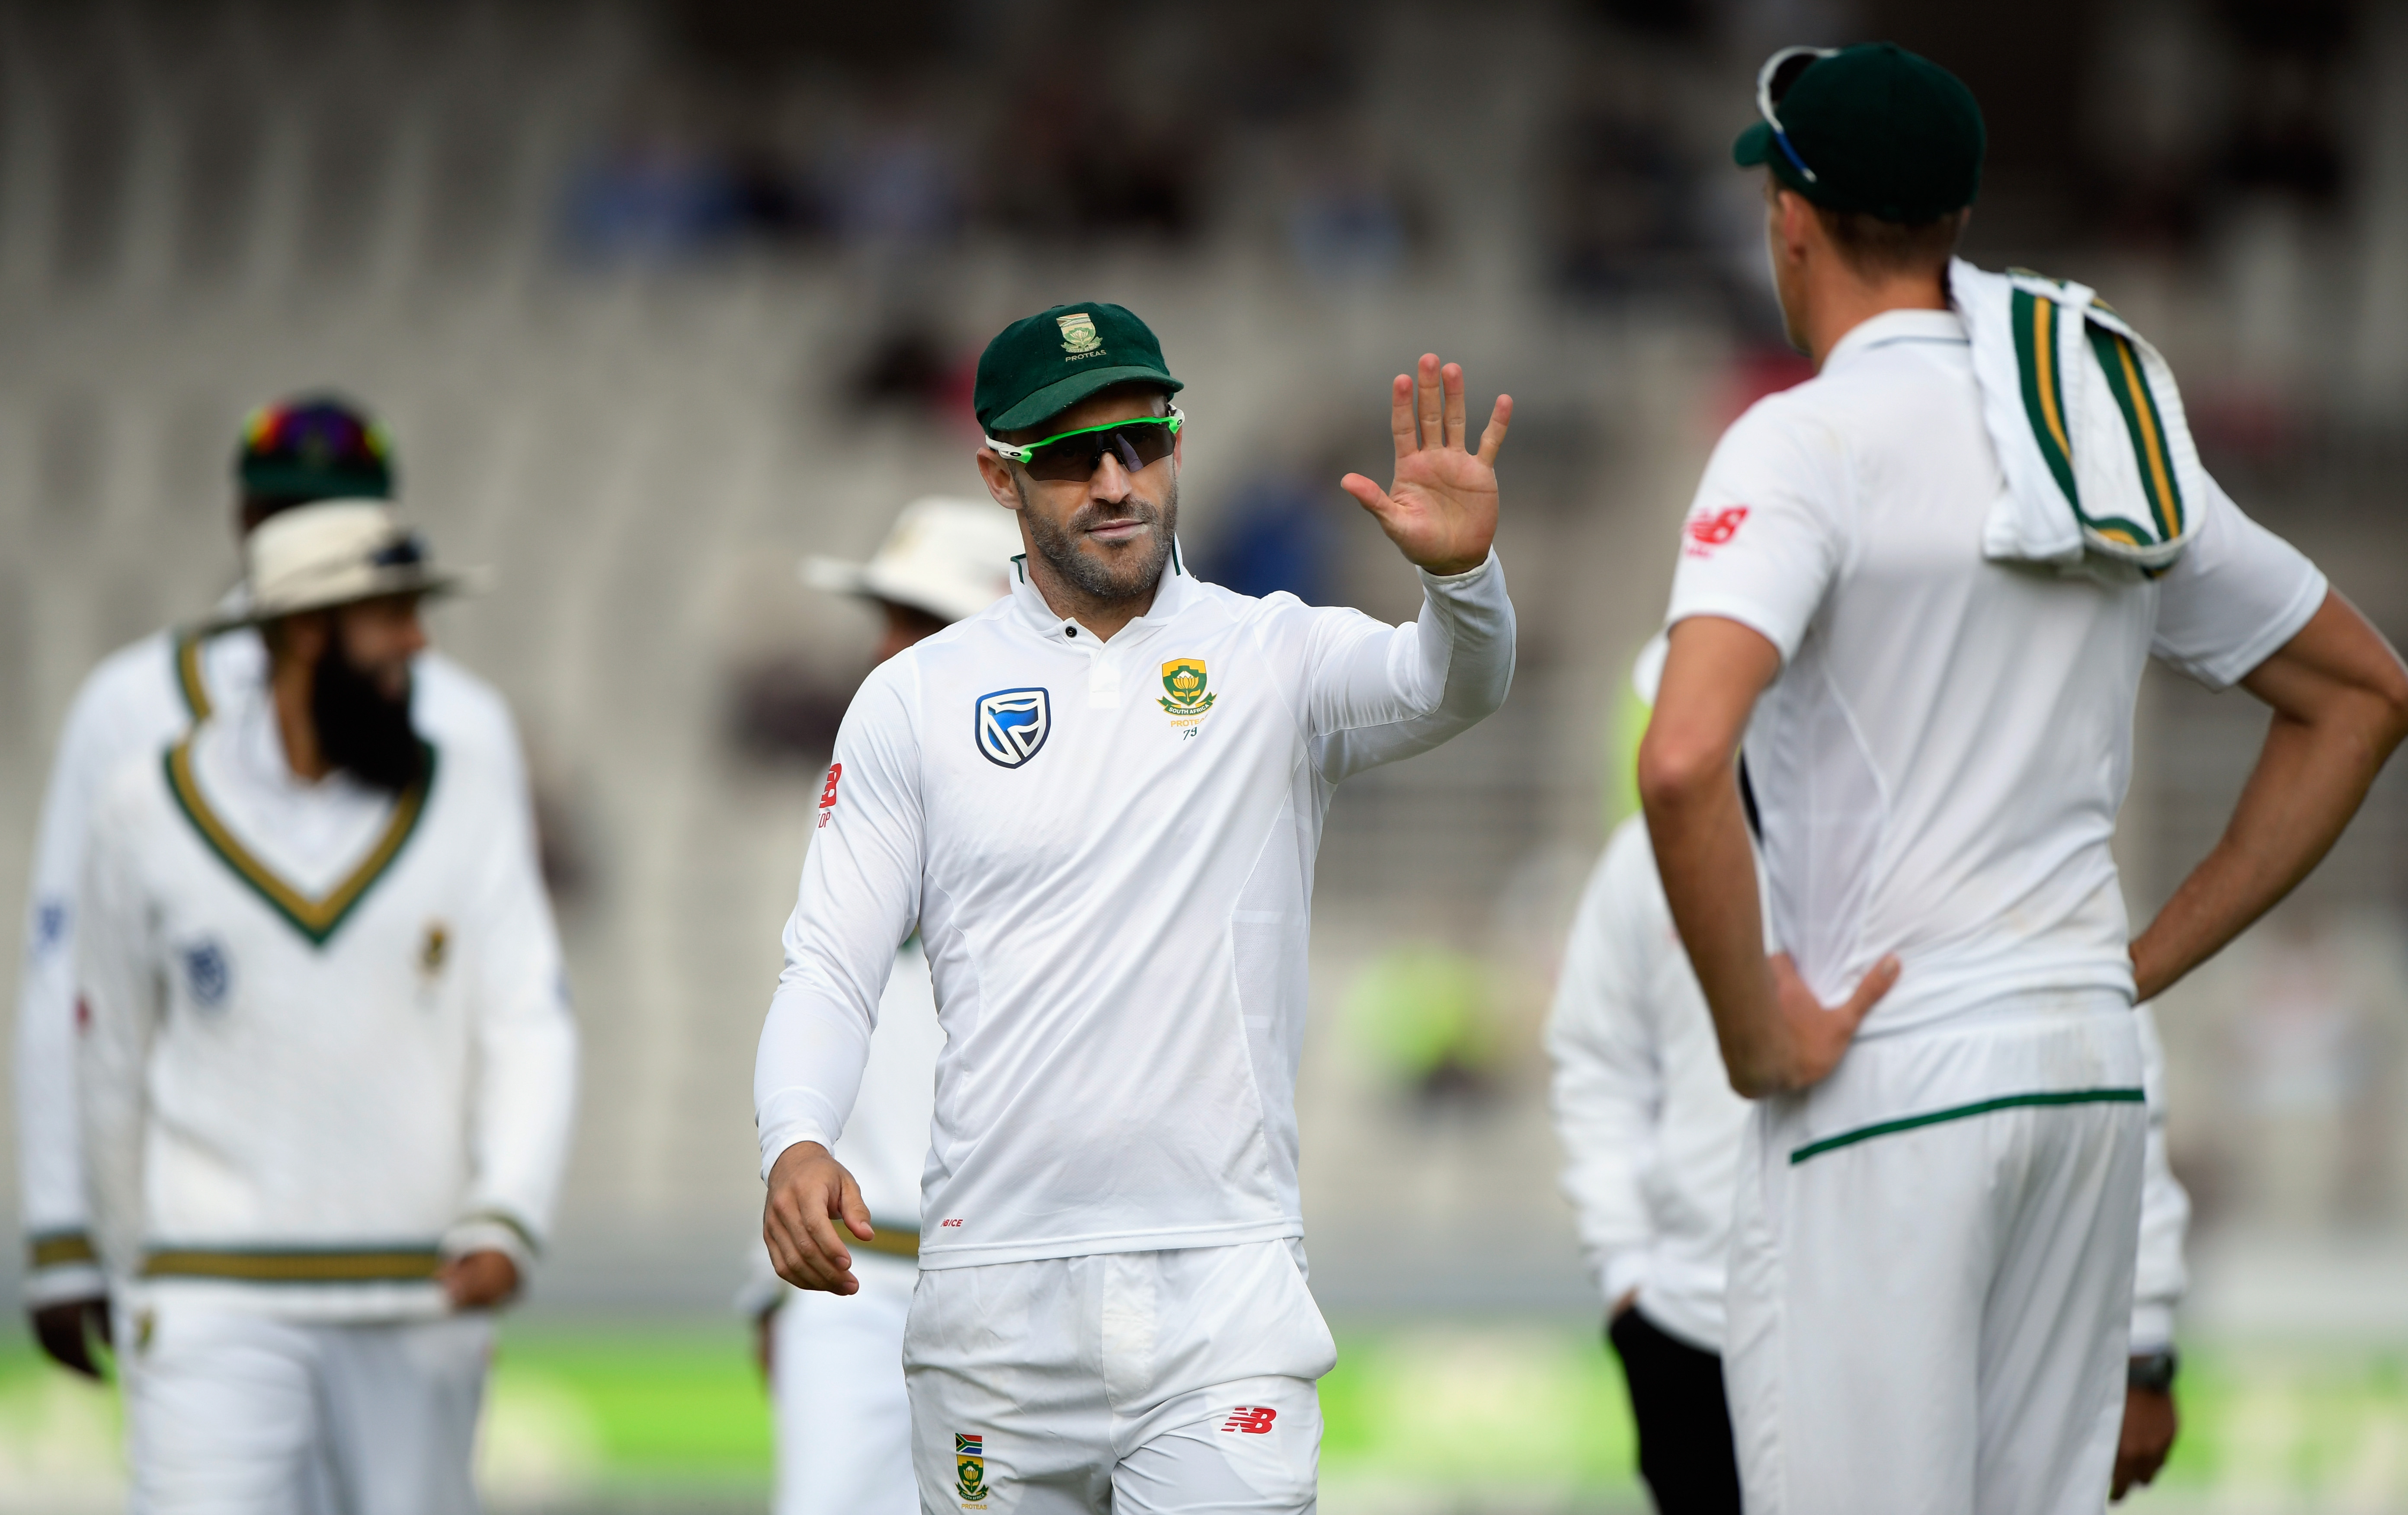 South African cricket needs to rebuild to be great again, states Faf du Plessis